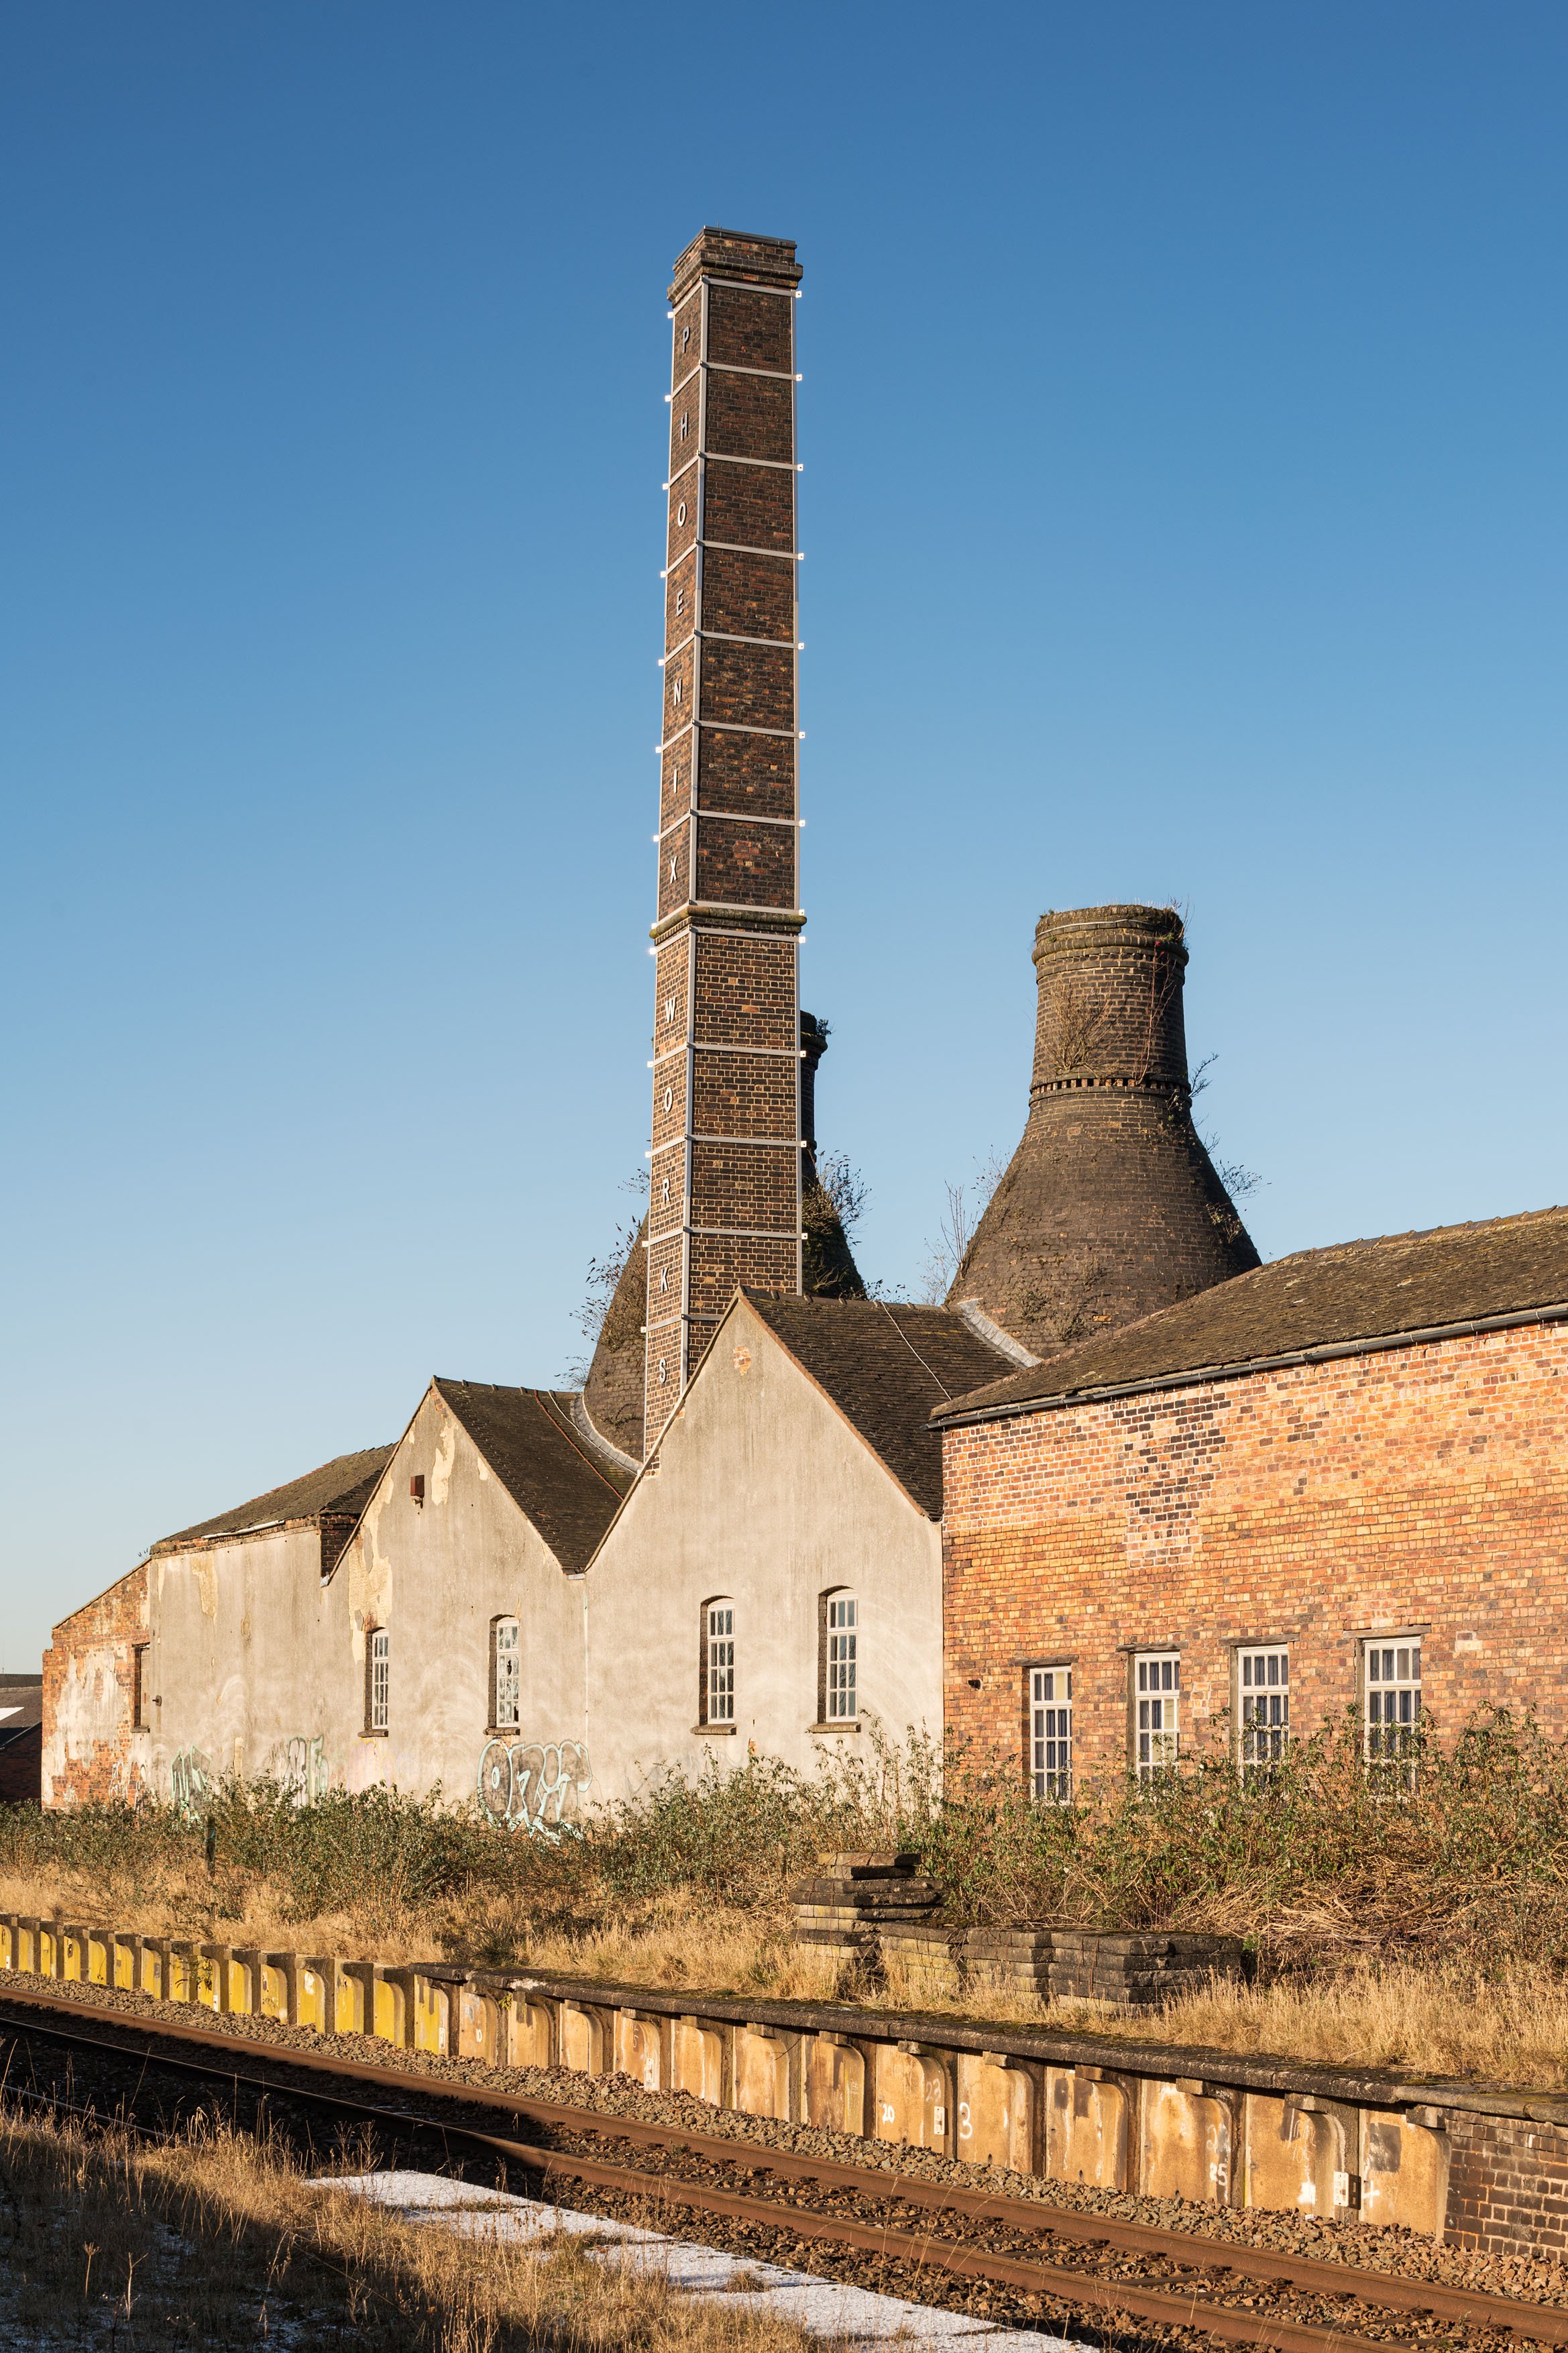 A brick building with a tall chimney